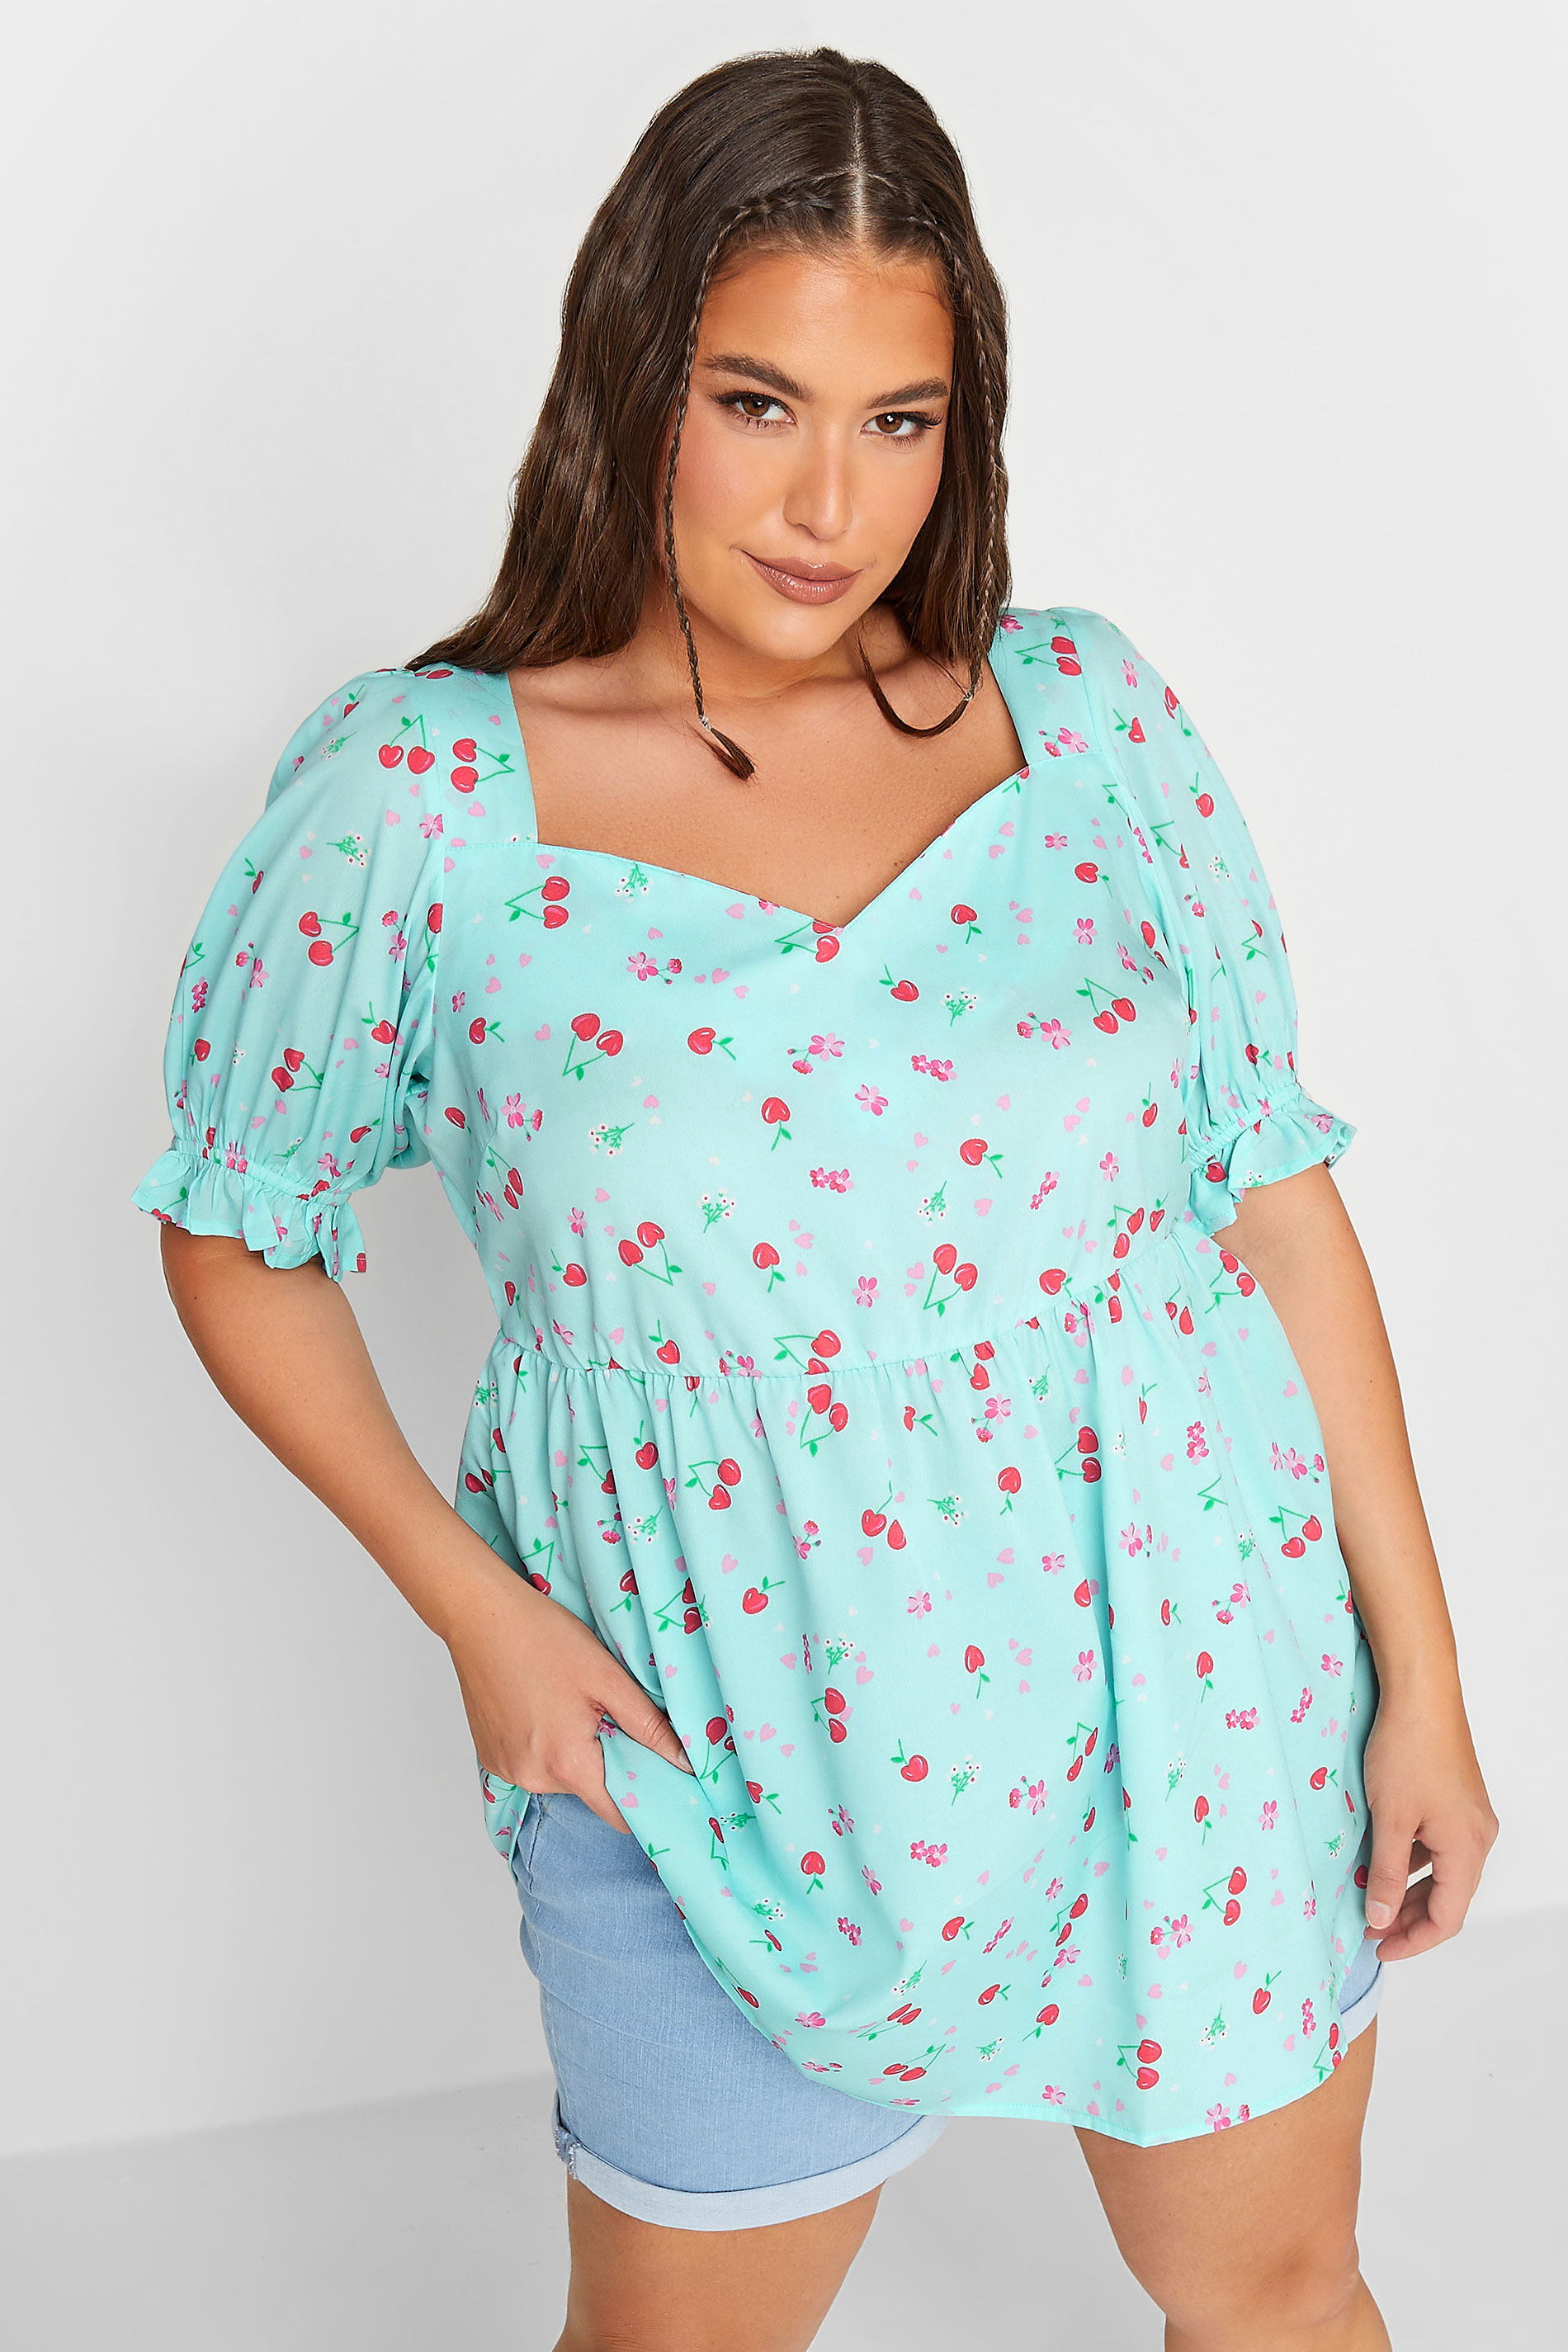 LIMITED COLLECTION Plus Size Curve Blue Cherry Print Peplum Top | Yours Clothing  2